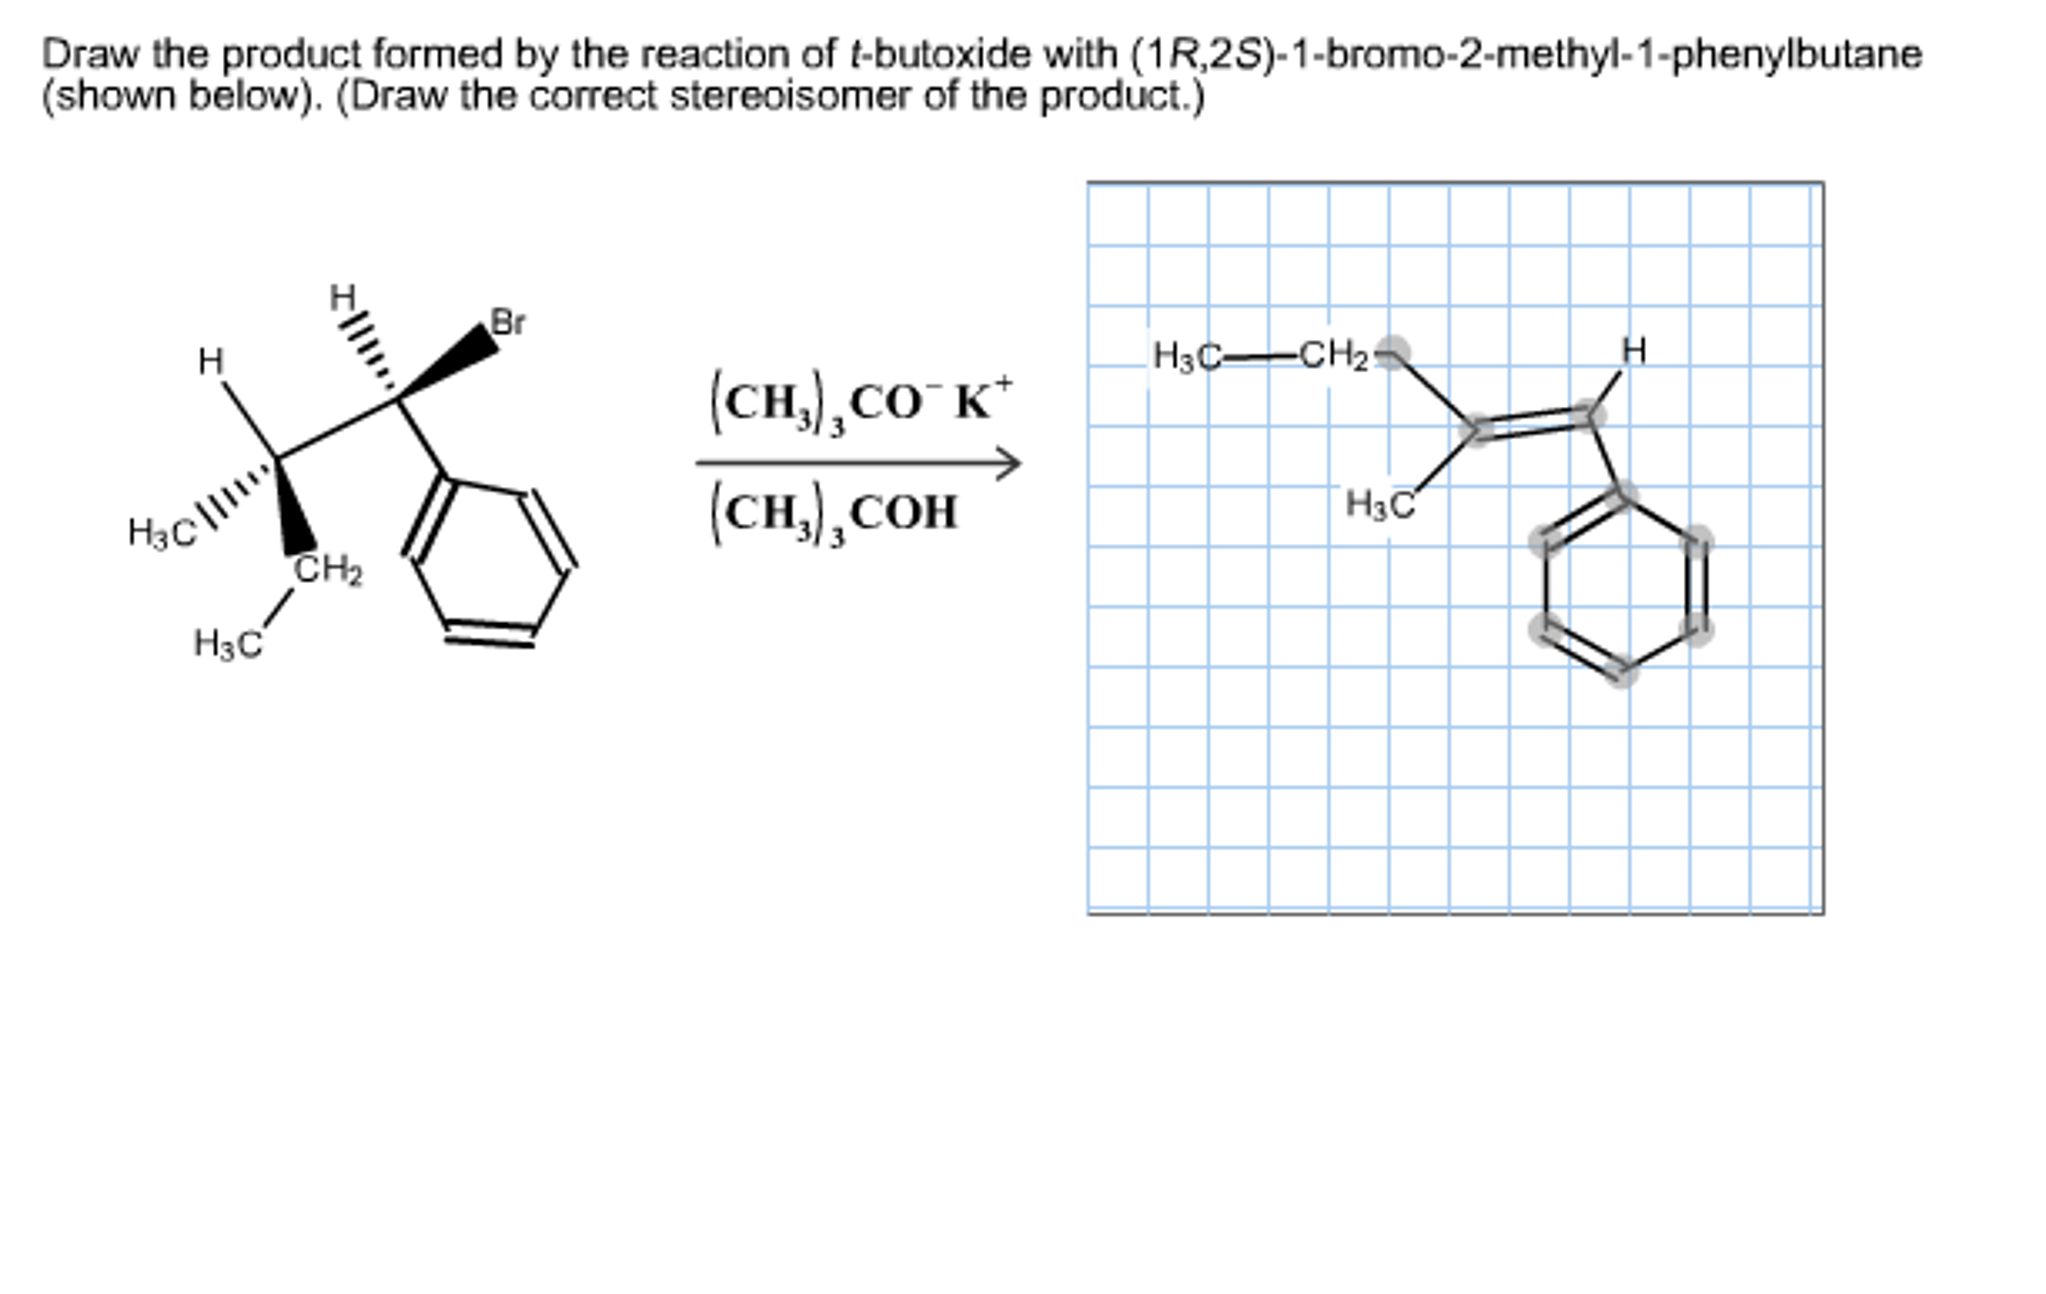 Draw The Product Formed By The Reaction Of Tbutox